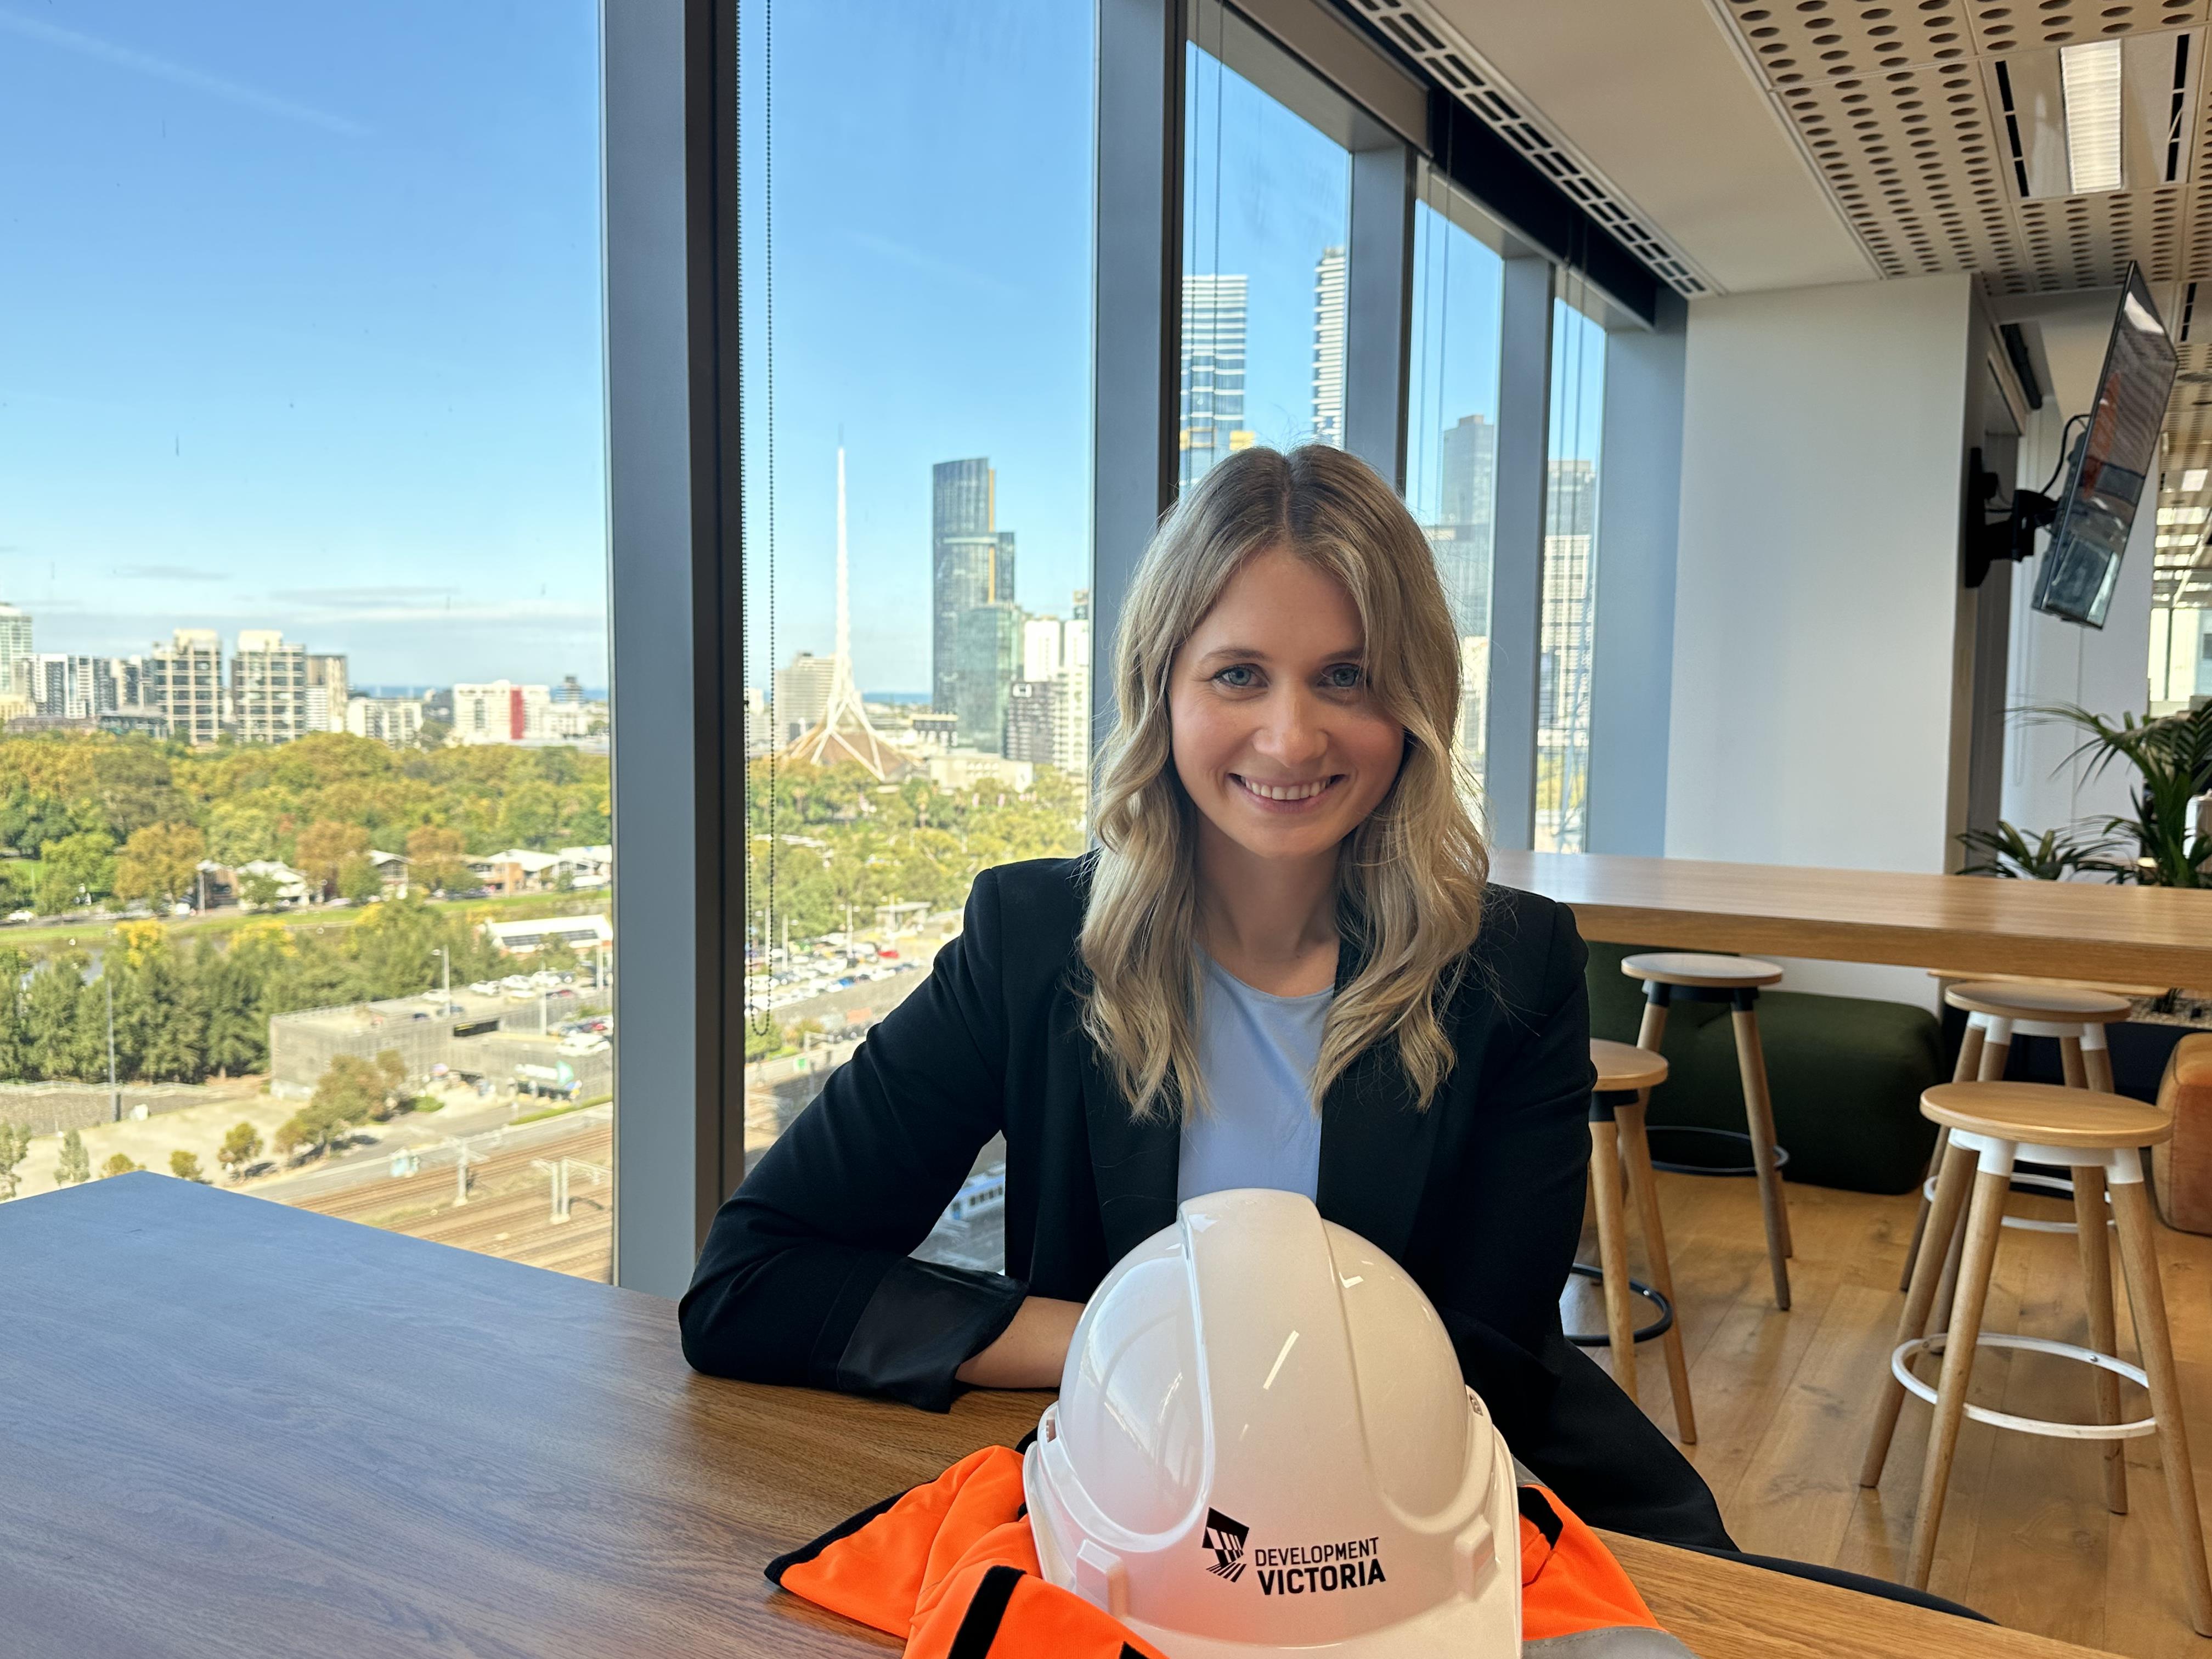 A white female with blonde hair smiling to the camera with a white hard hat with Development Victoria written on it in front of her